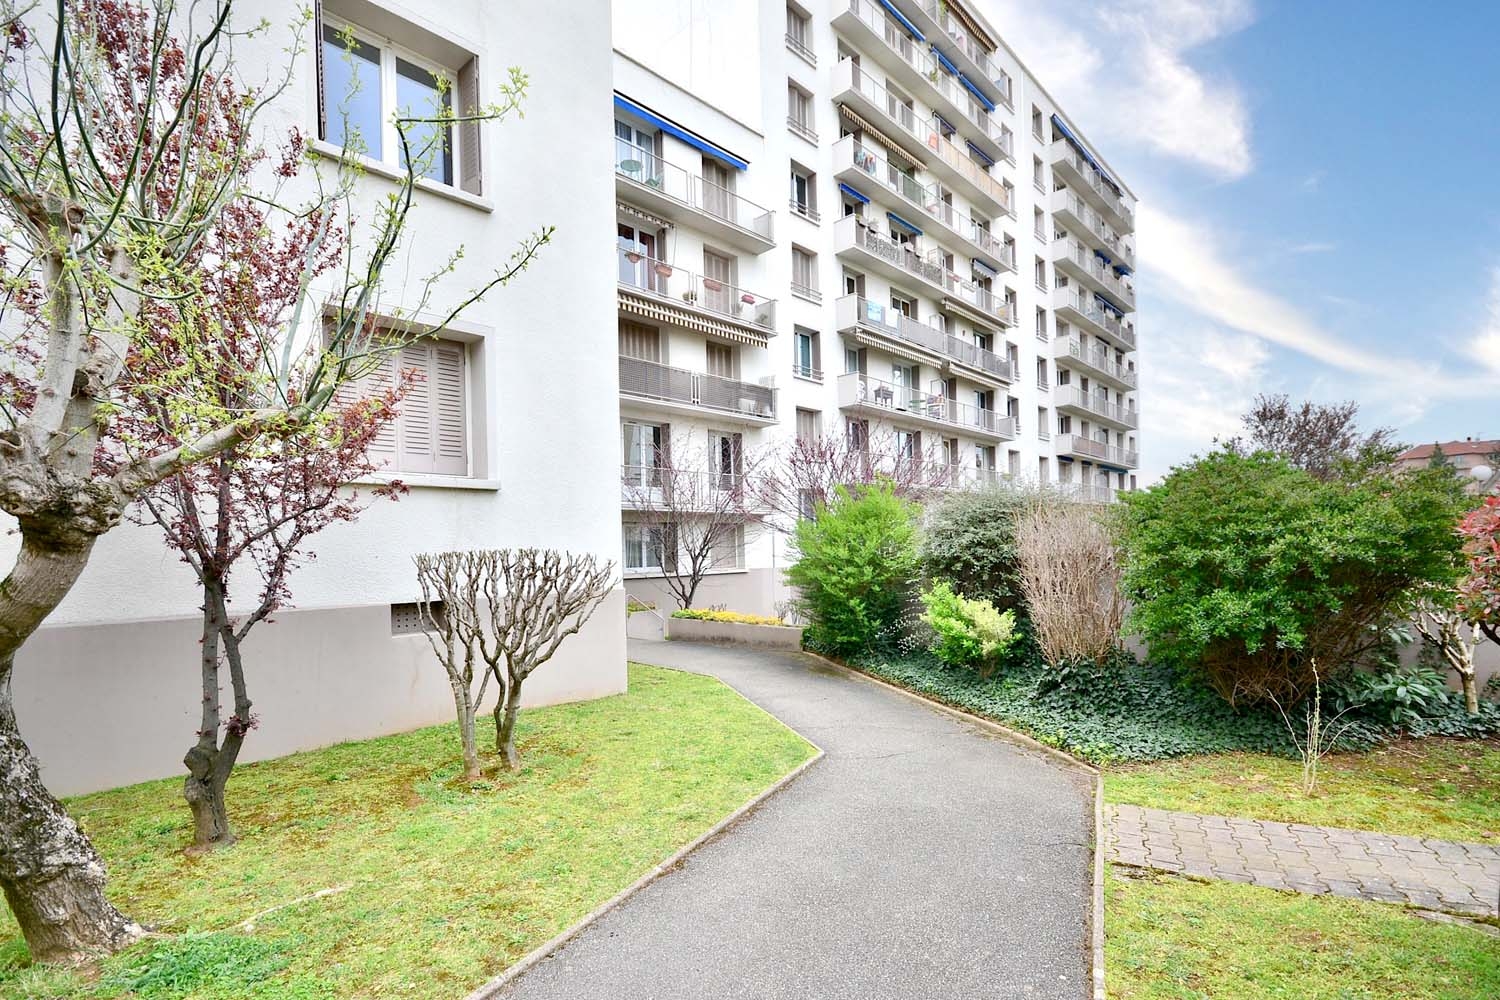 vente appartement lyon 8 agence-immobiliere Annecy